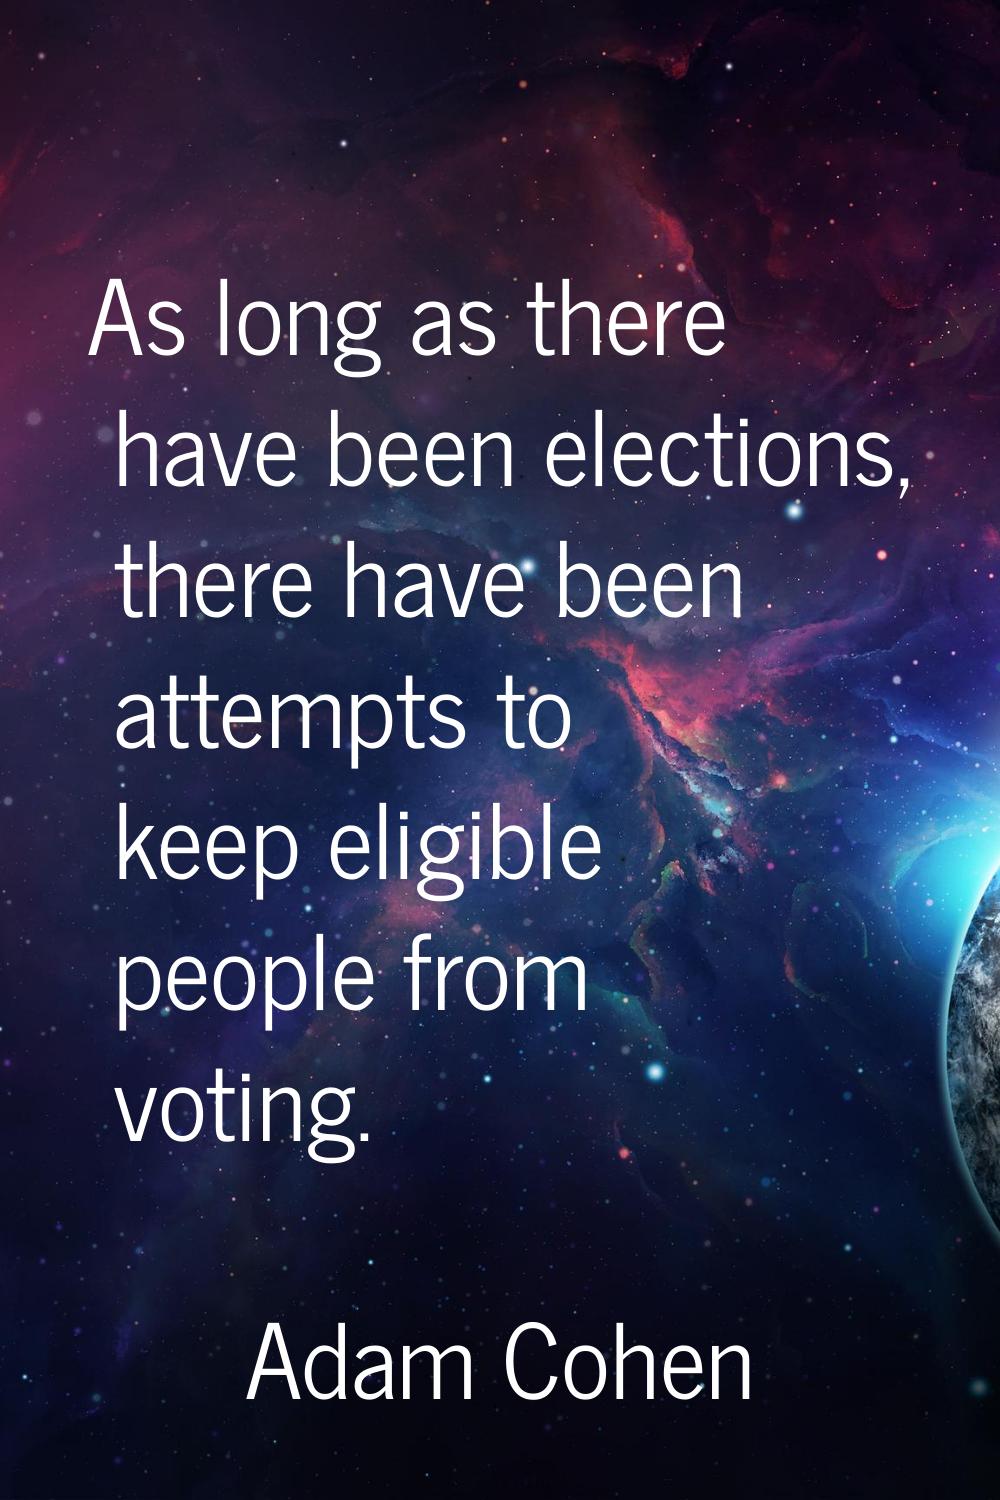 As long as there have been elections, there have been attempts to keep eligible people from voting.